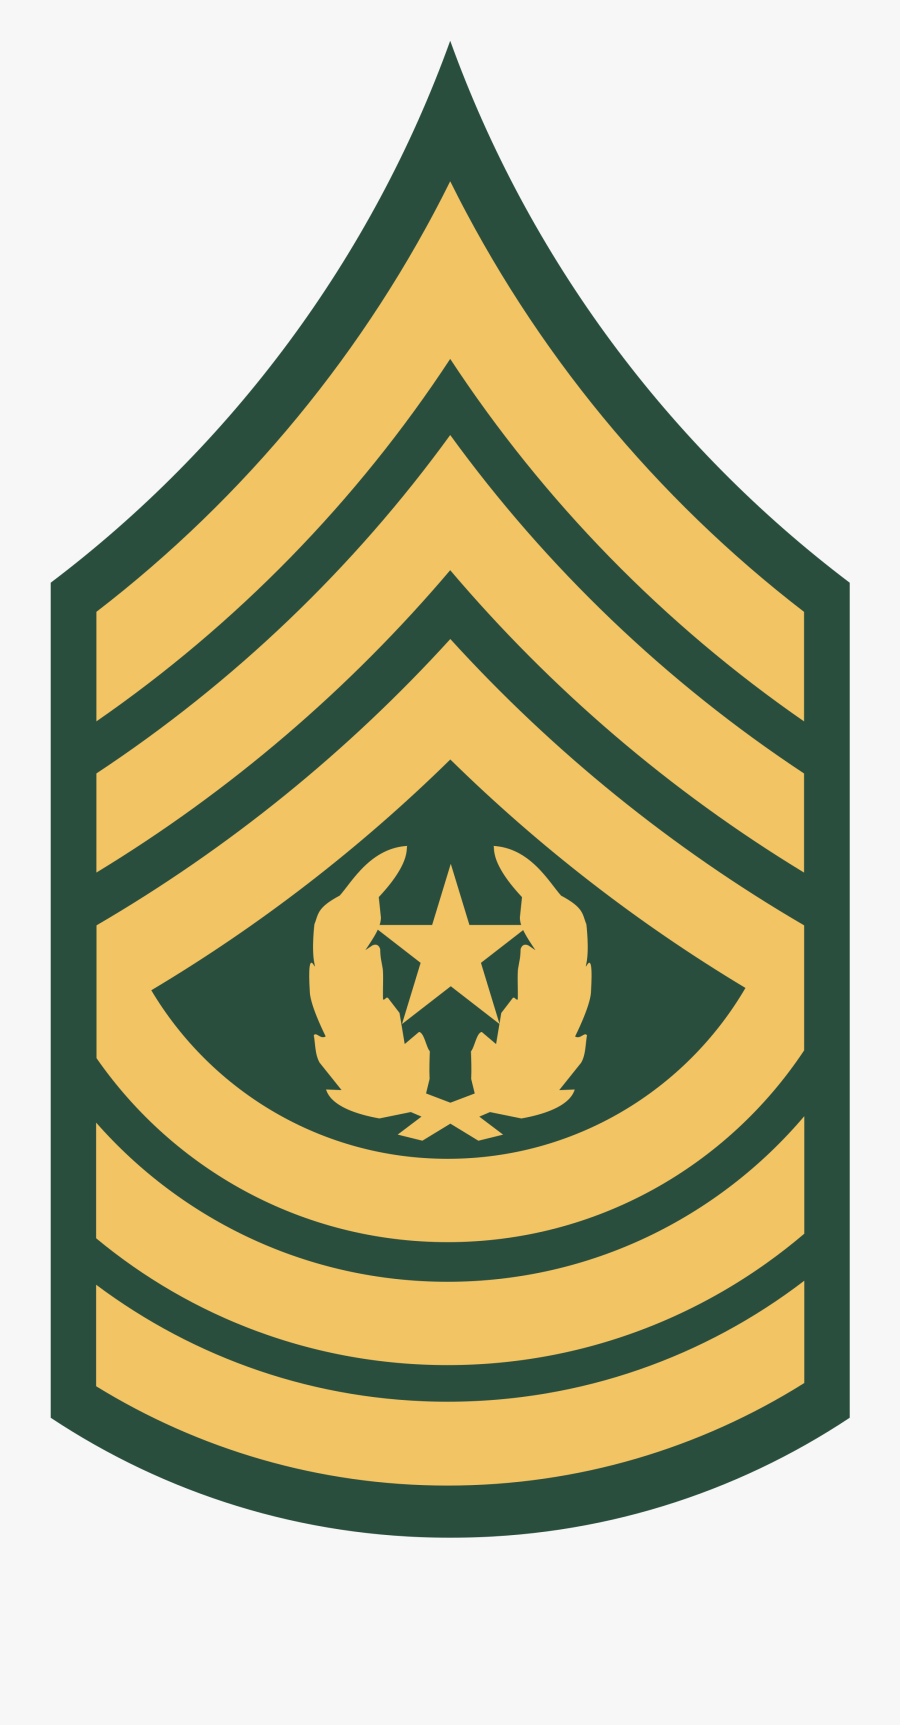 Us Army E - Army Master Sergeant Rank, Transparent Clipart